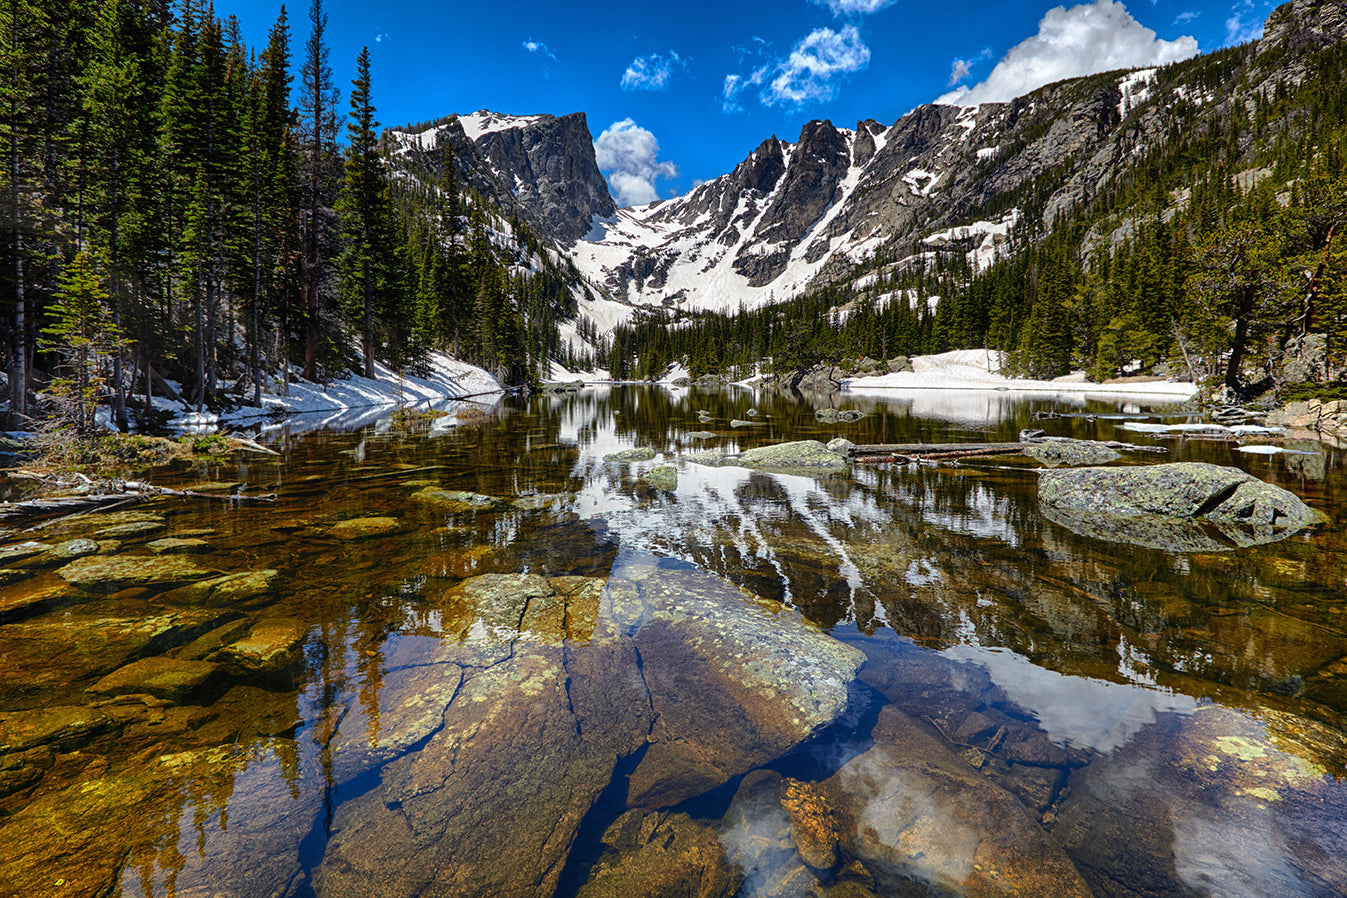 Dream Lake - Rocky Mountain National Park - My Nature Book Adventures